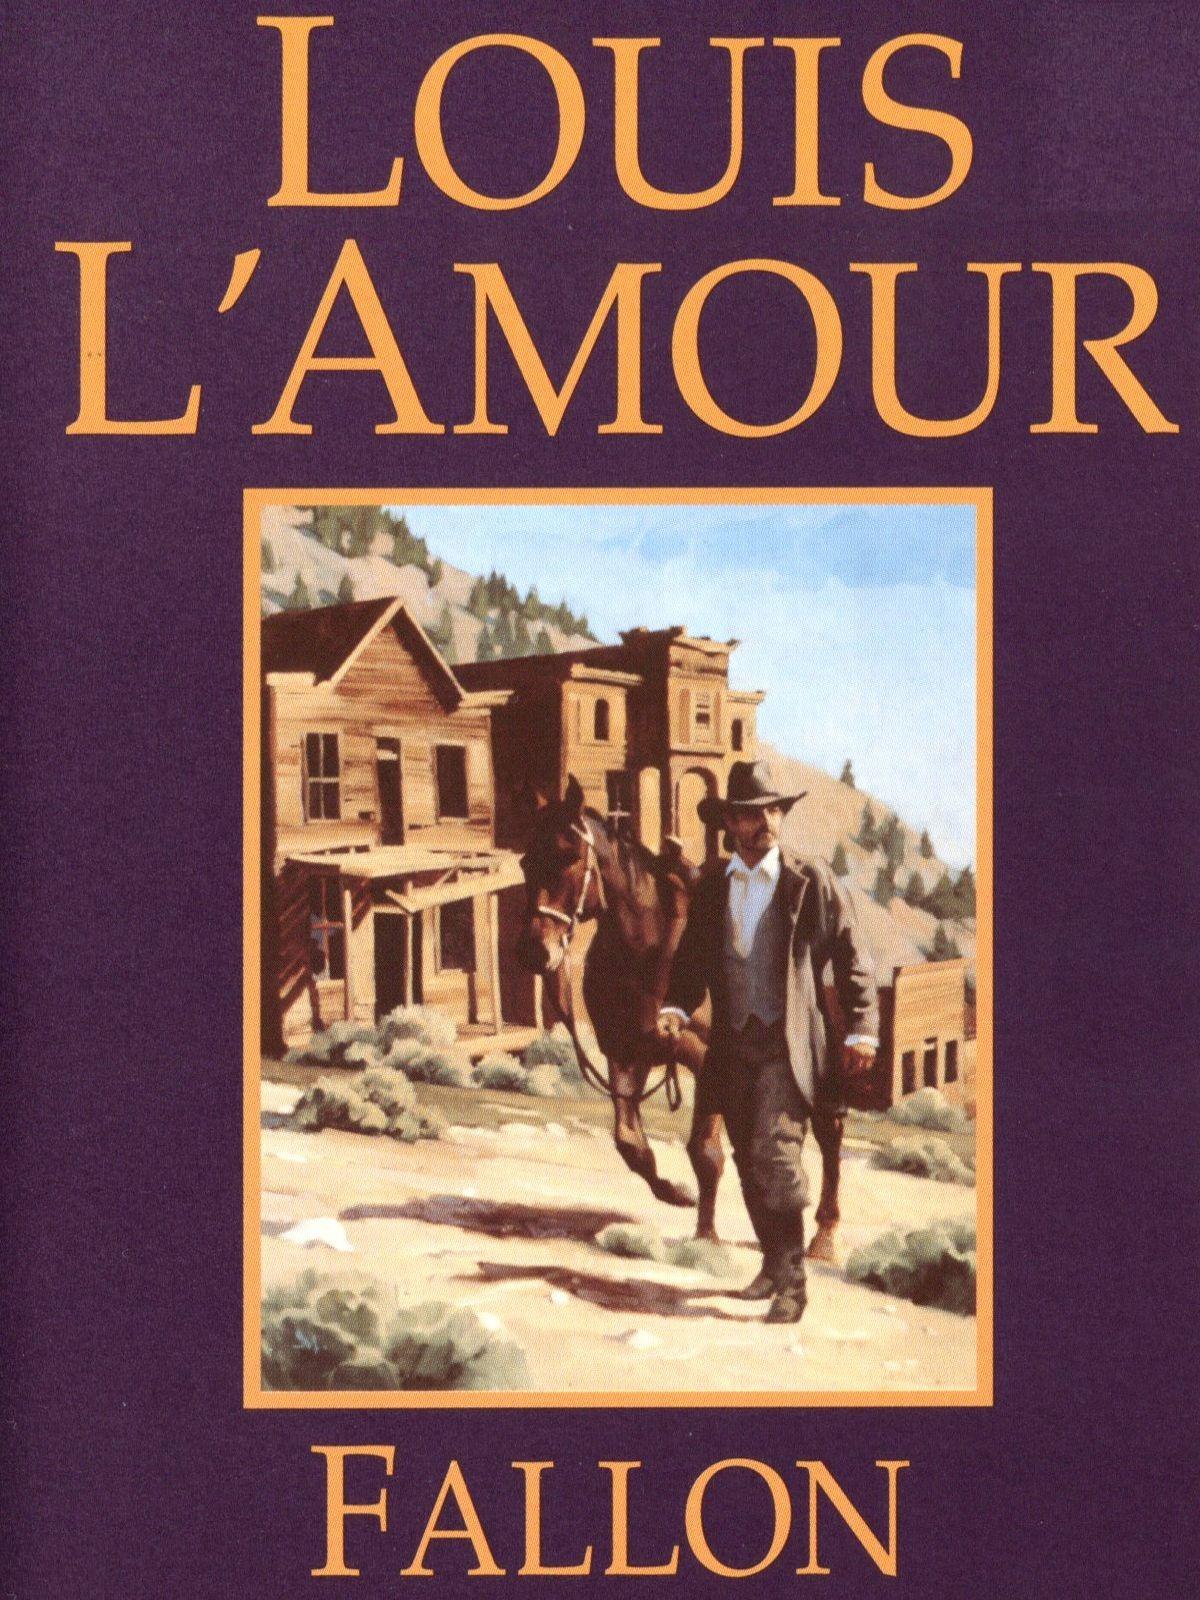 Novel 1963 - Fallon (v5.0) READ ONLINE FREE book by Louis L&#39;Amour in EPUB,TXT.